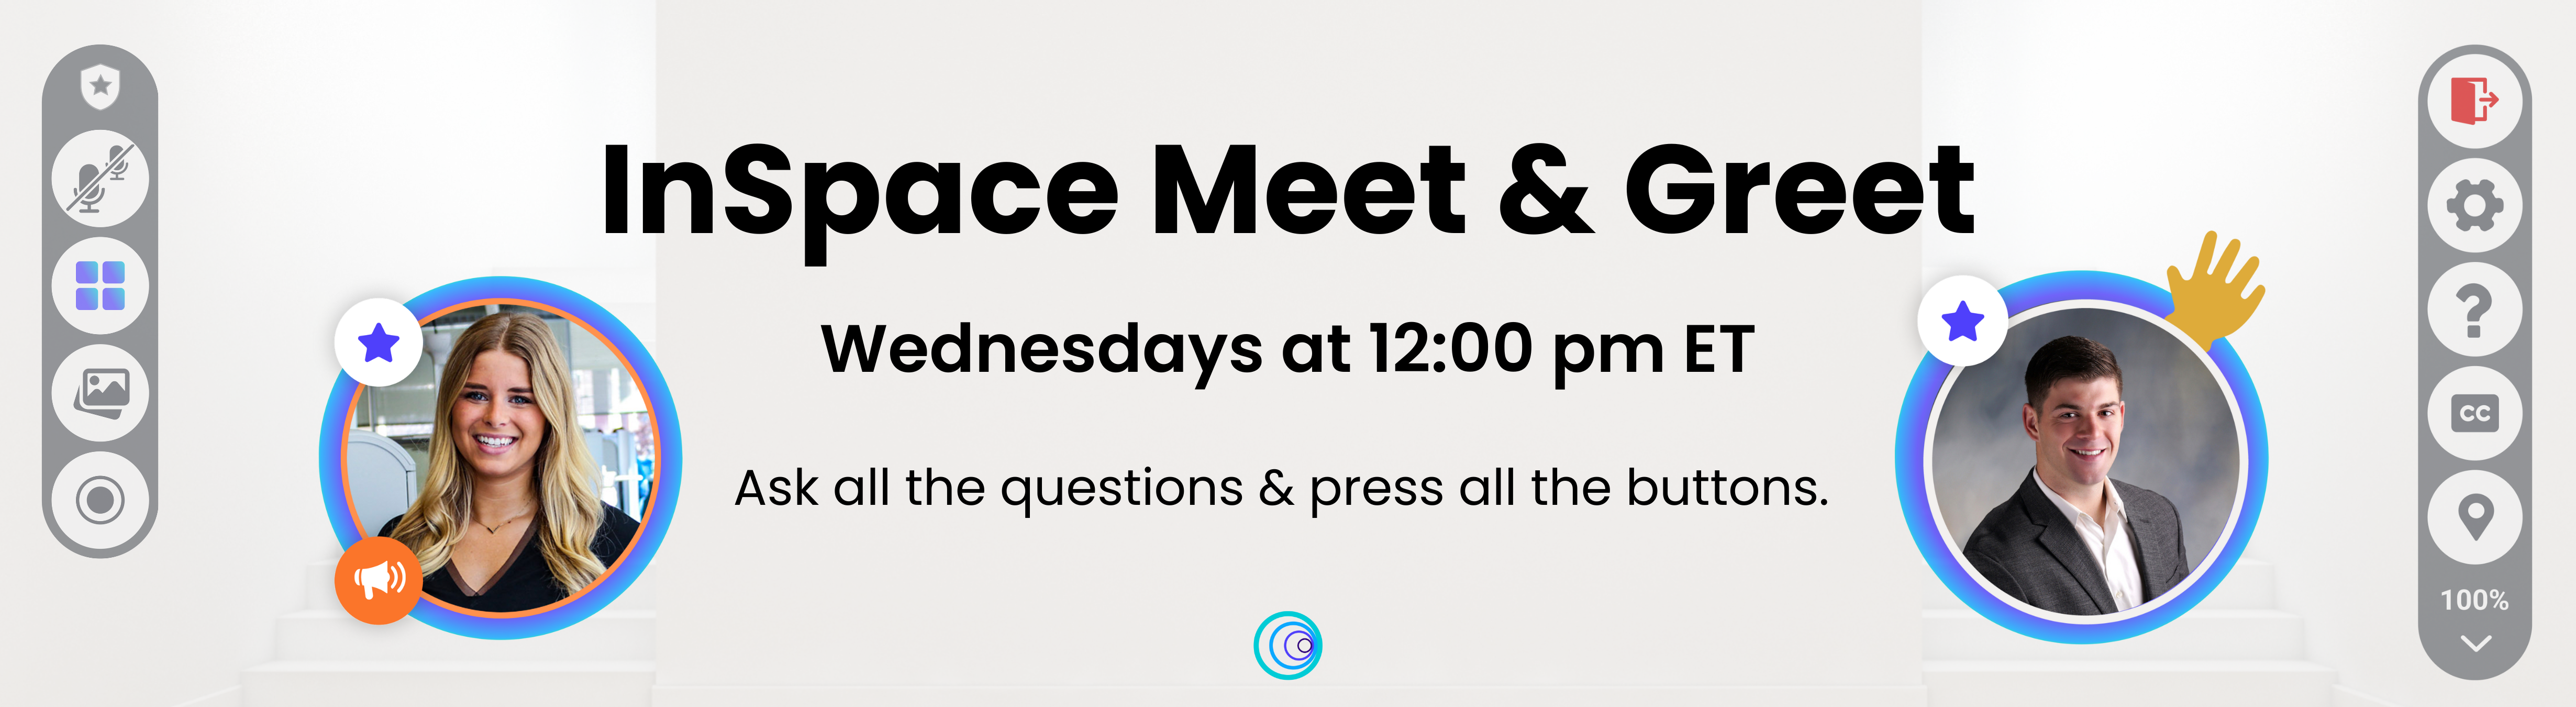 InSpace Meet and Greet, Weds at 12 pm ET. Ask all the questions and press all the buttons. Nicole and Justin smile at the camera. 